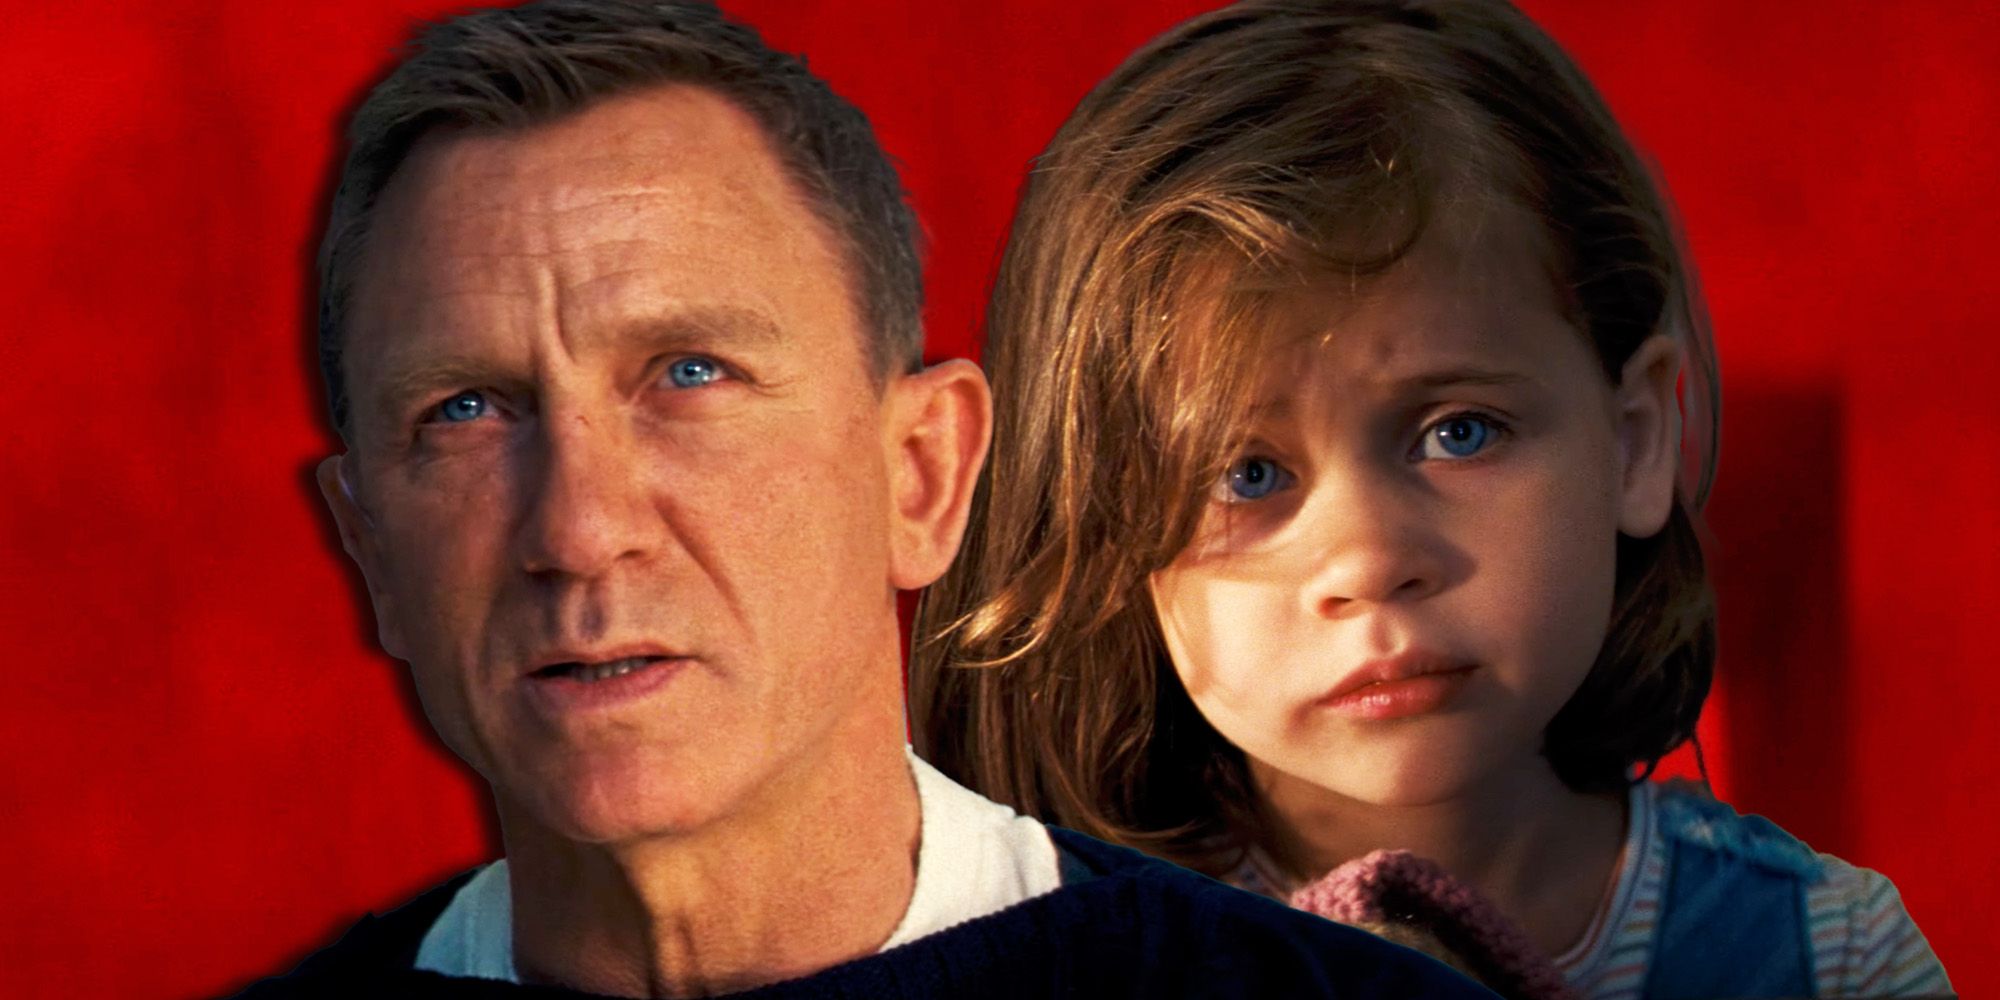 Daniel Craig as James Bond and his daughter Mathilde in No Time To Die